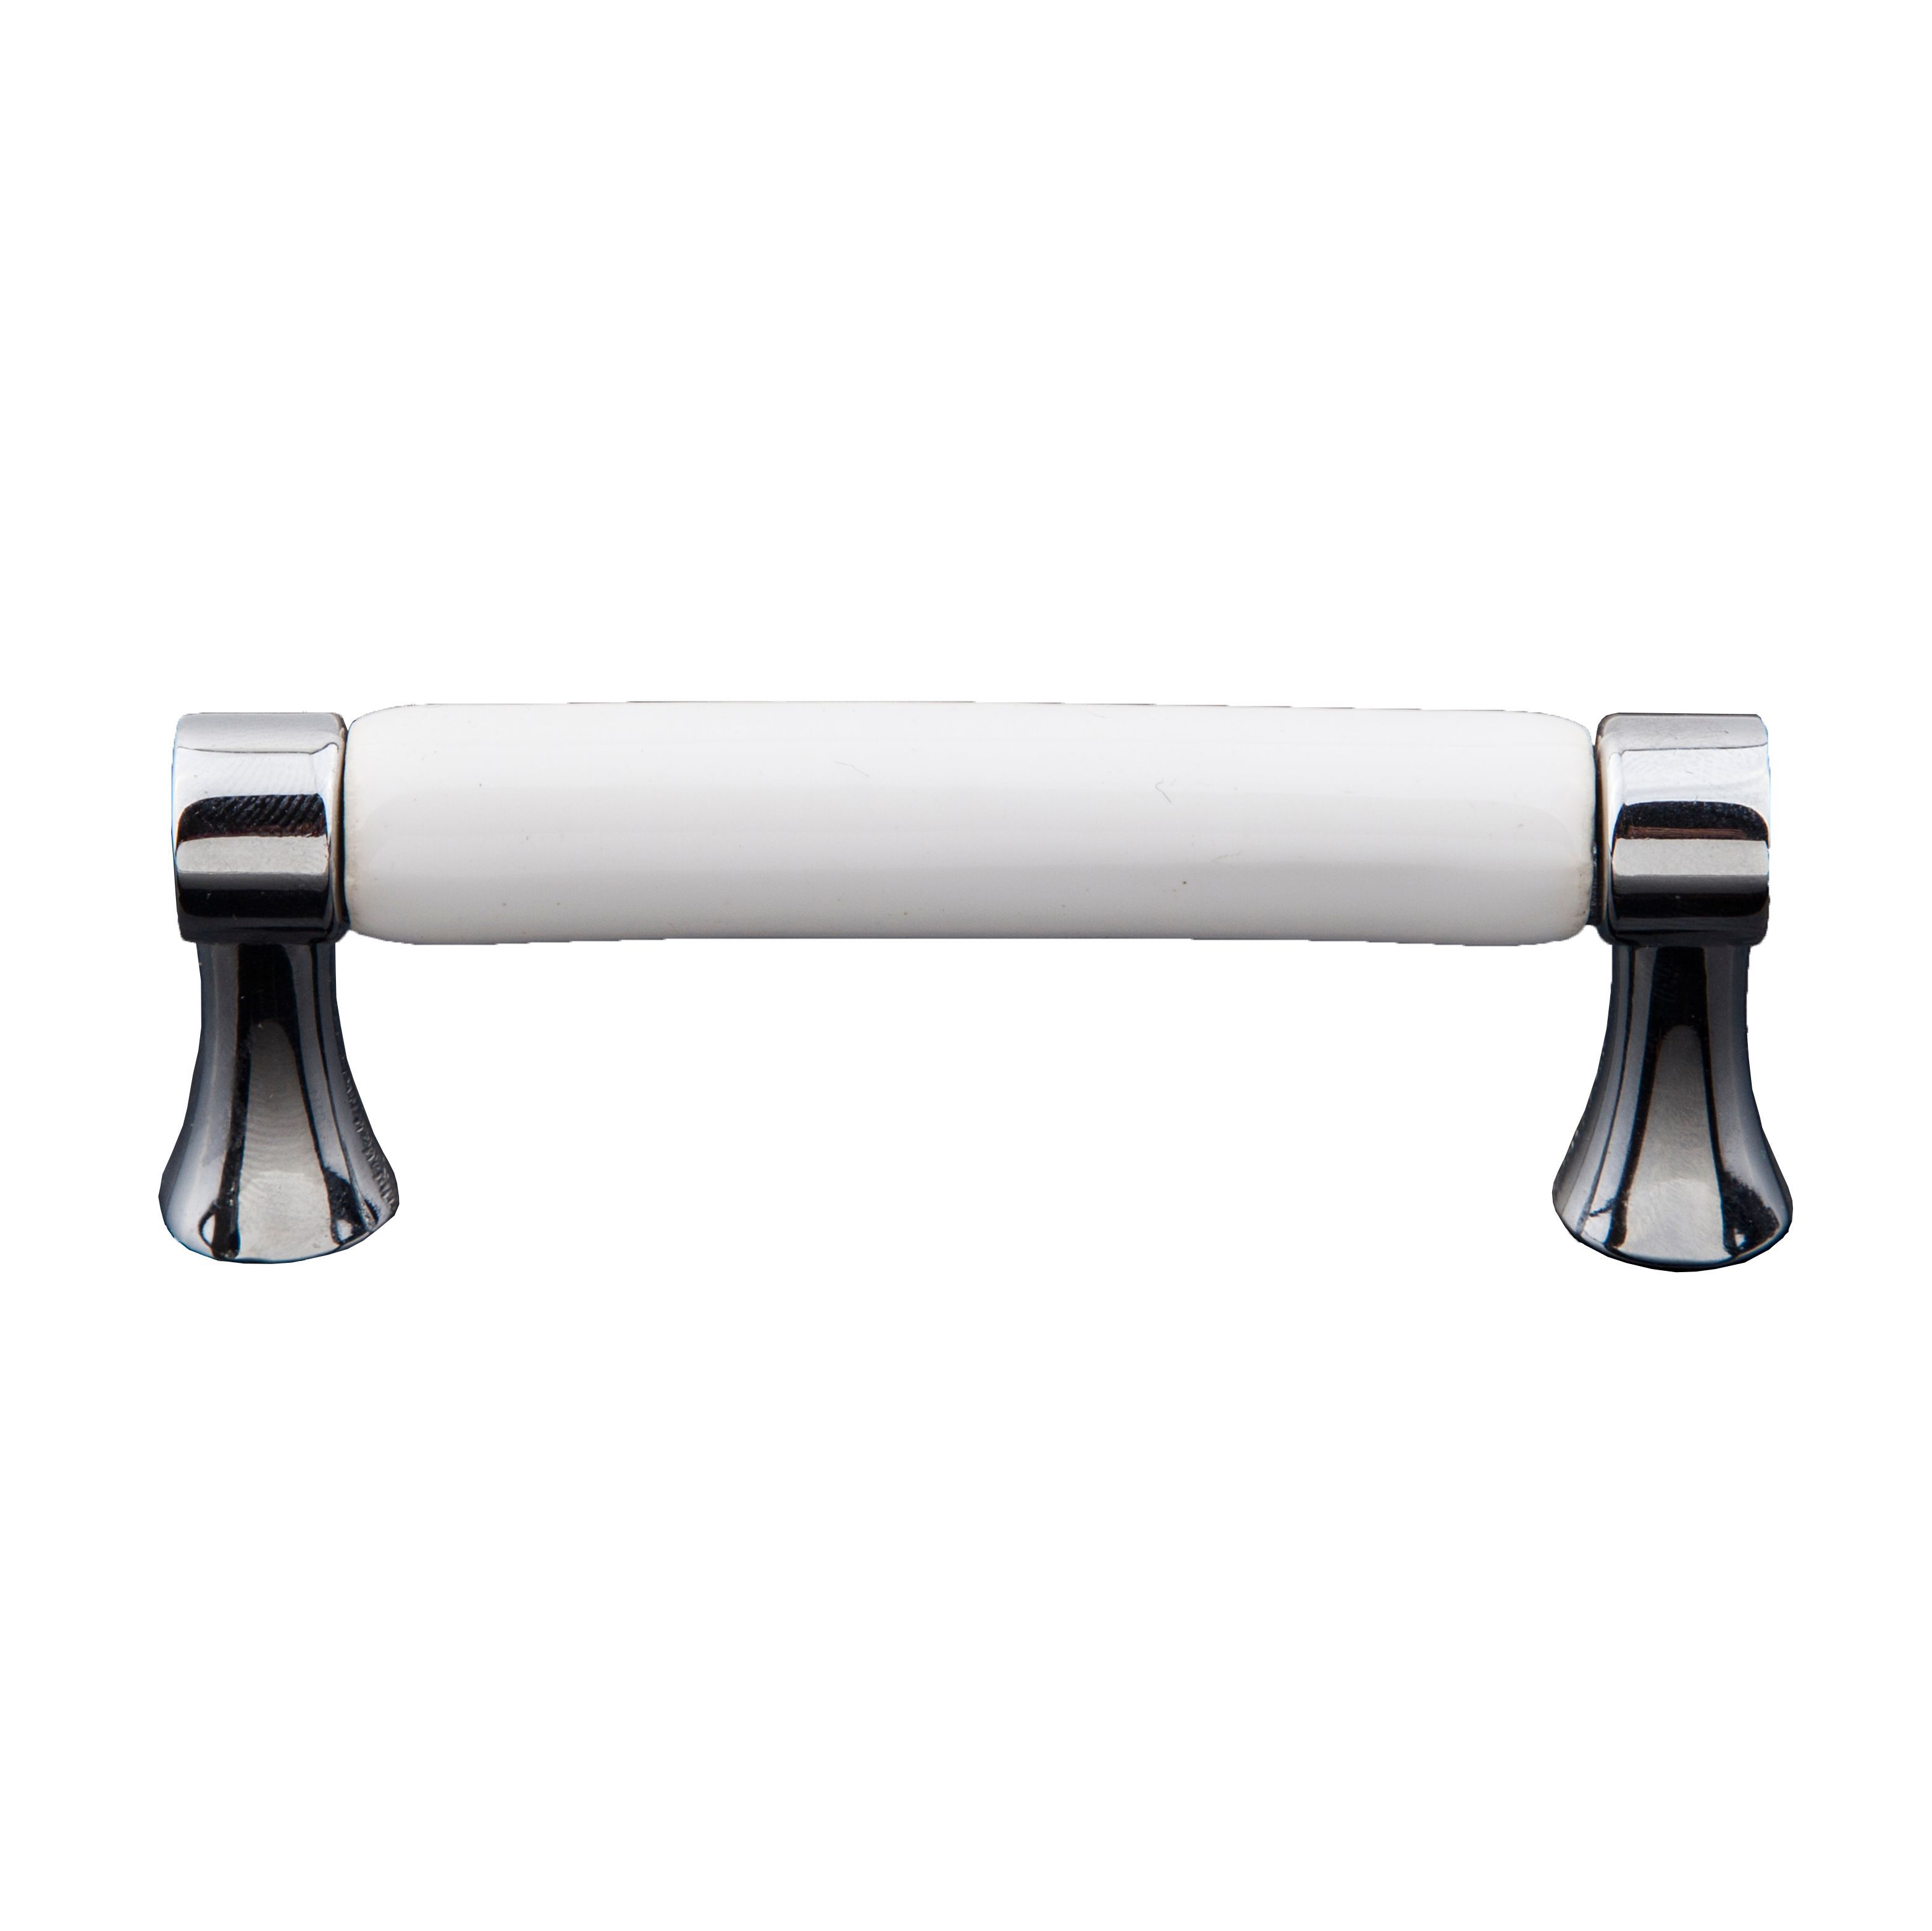 B&Q White Chrome Classic Cabinet pull, Pack of 1 | Departments | DIY at B&Q